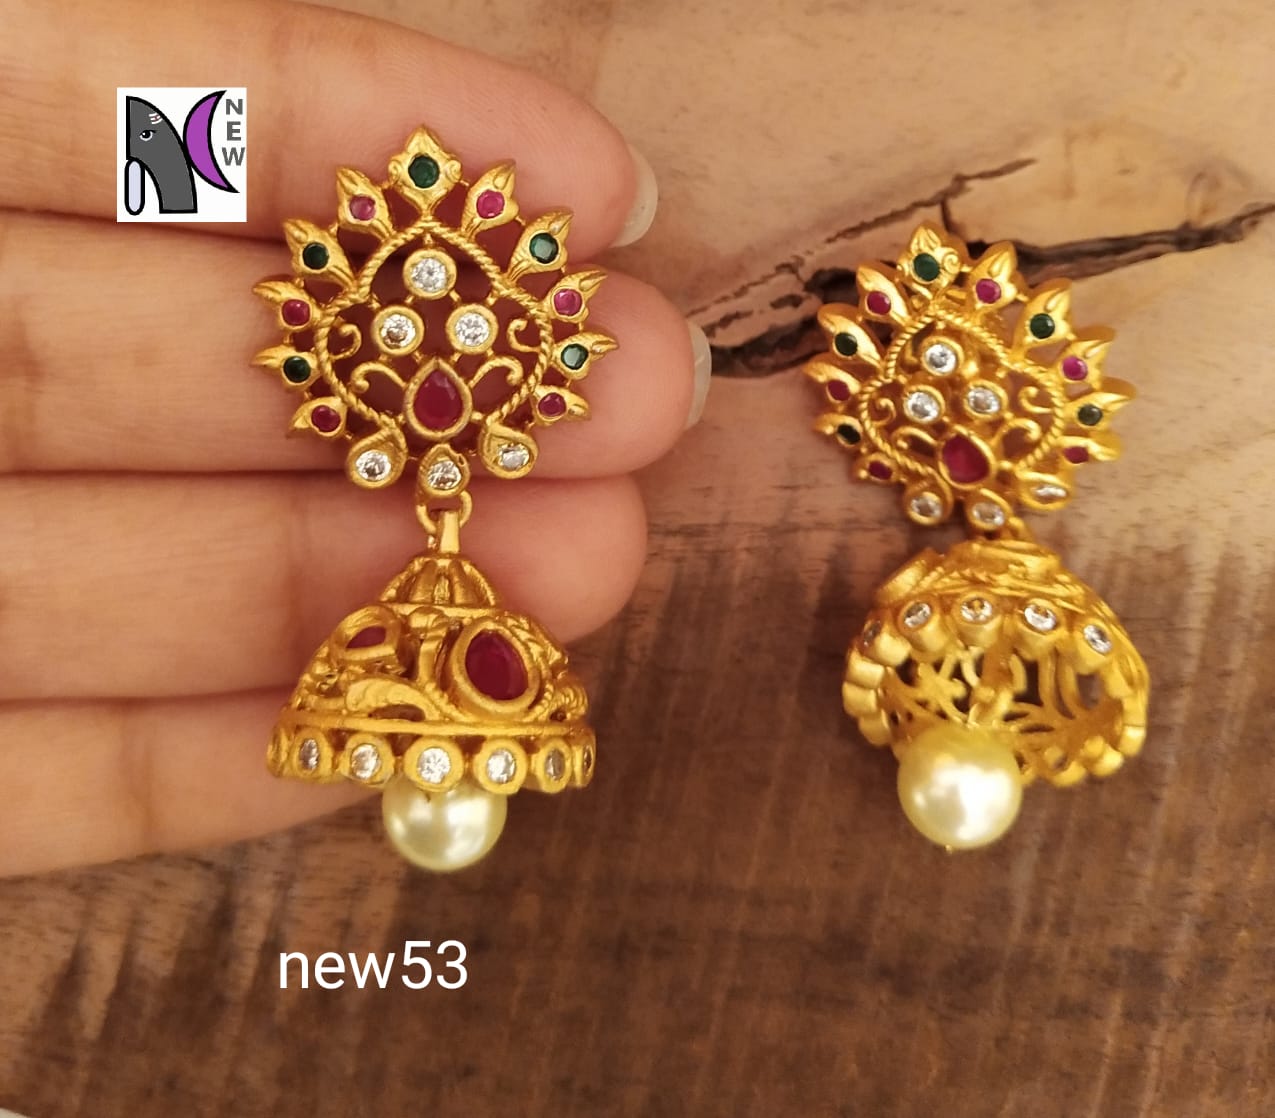 Latest Jewelry Collection June 2020 - Indian Jewelry Designs